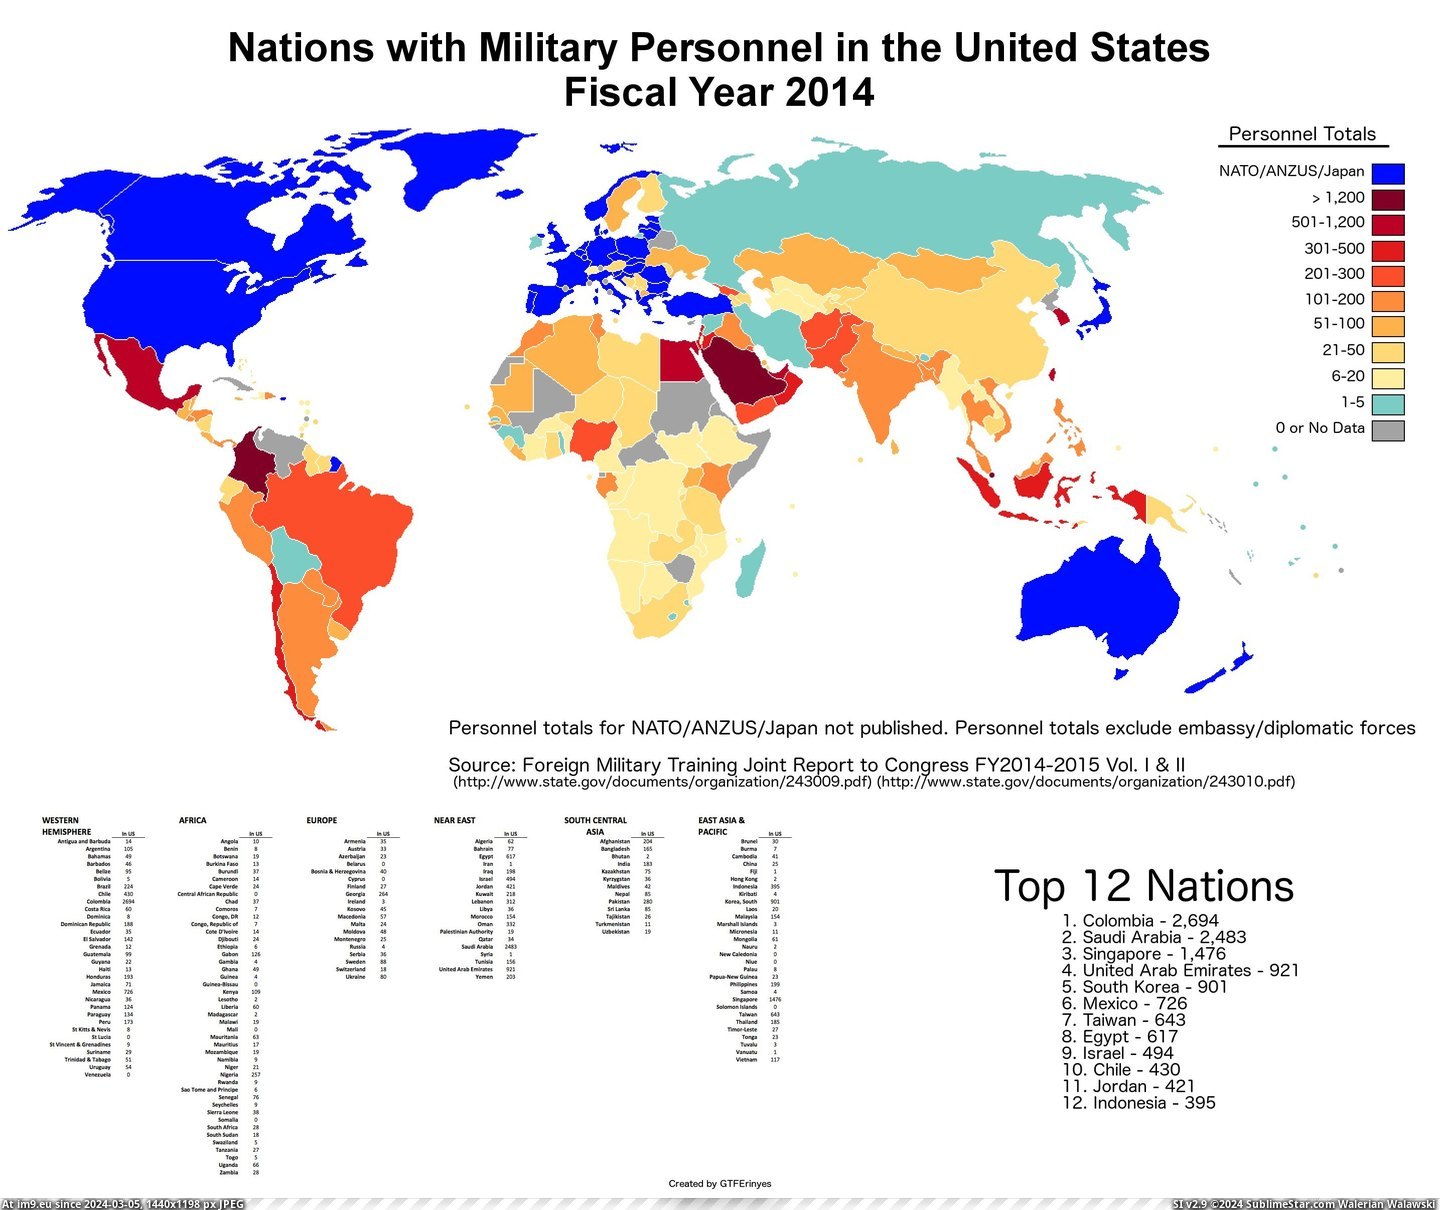 #States #Japan #United #Plot #Nato #Embassy #Military #Nations #Twist [Mapporn] Plot Twist: Nations with military personnel INSIDE the United States in 2014 (excluding NATO-ANZUS-Japan and embassy-d Pic. (Изображение из альбом My r/MAPS favs))